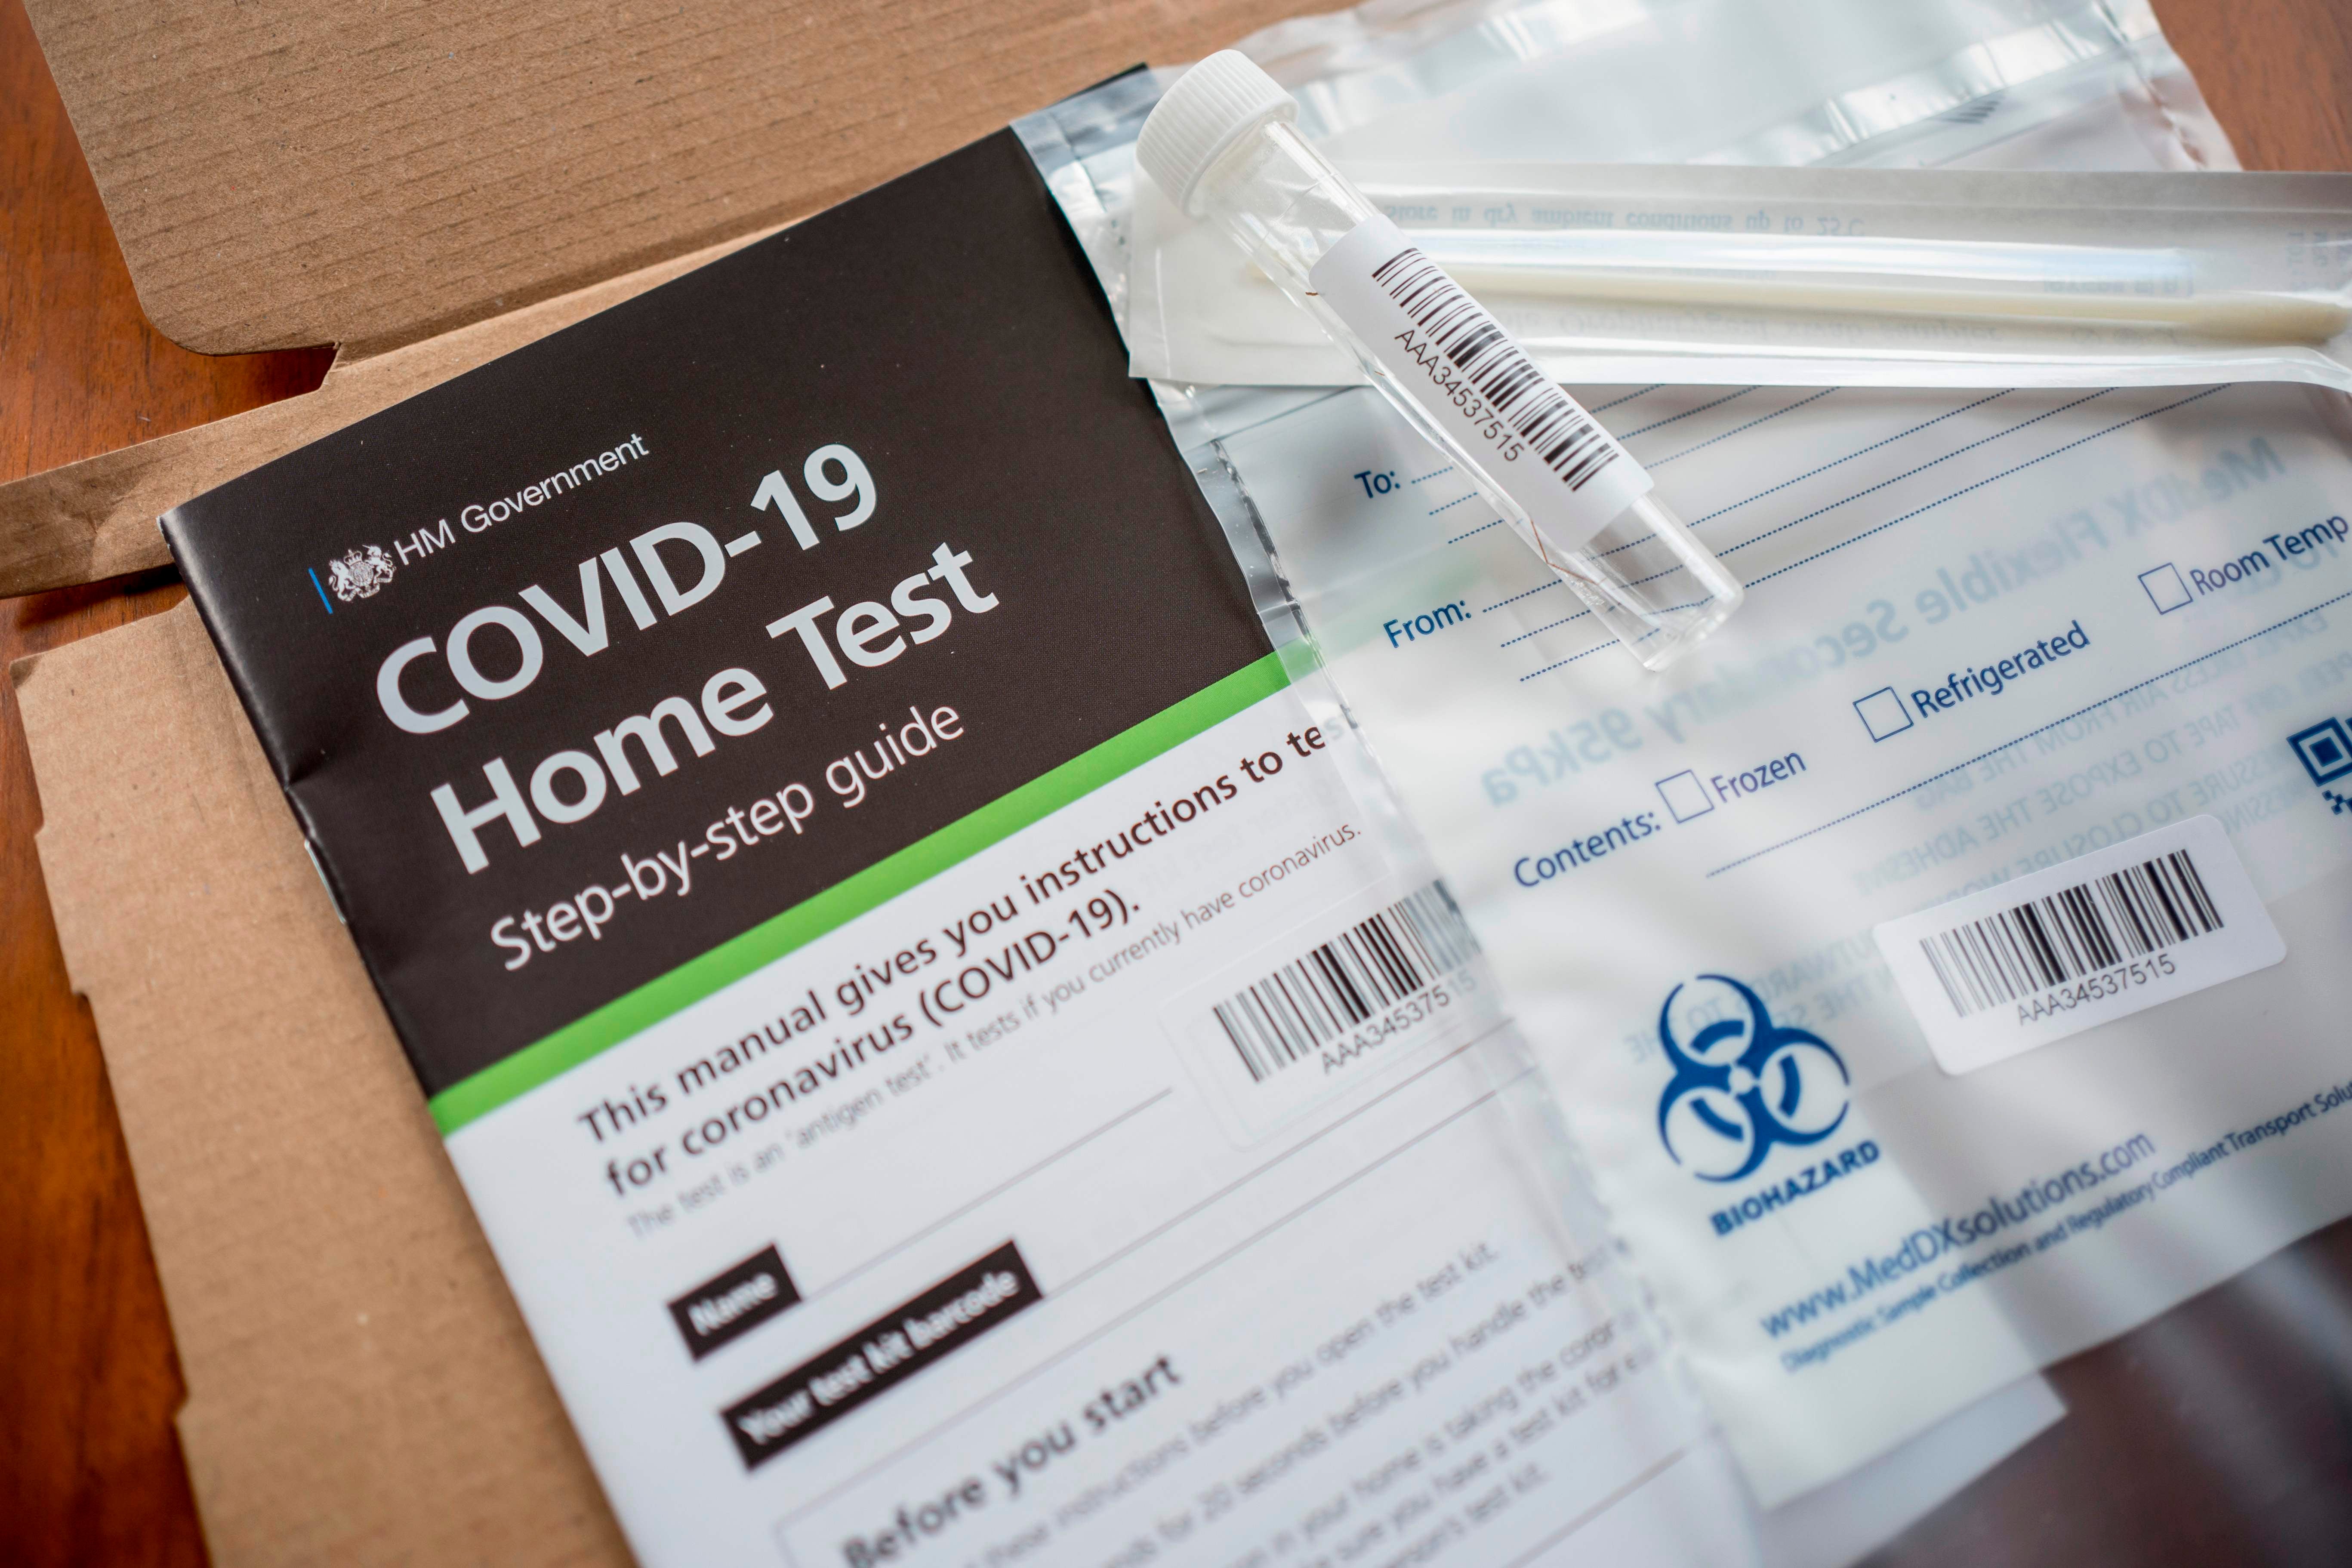 The contents of a UK Government Covid-19 antigen home test kit, which determines whether you are currently infected with the novel coronavirus